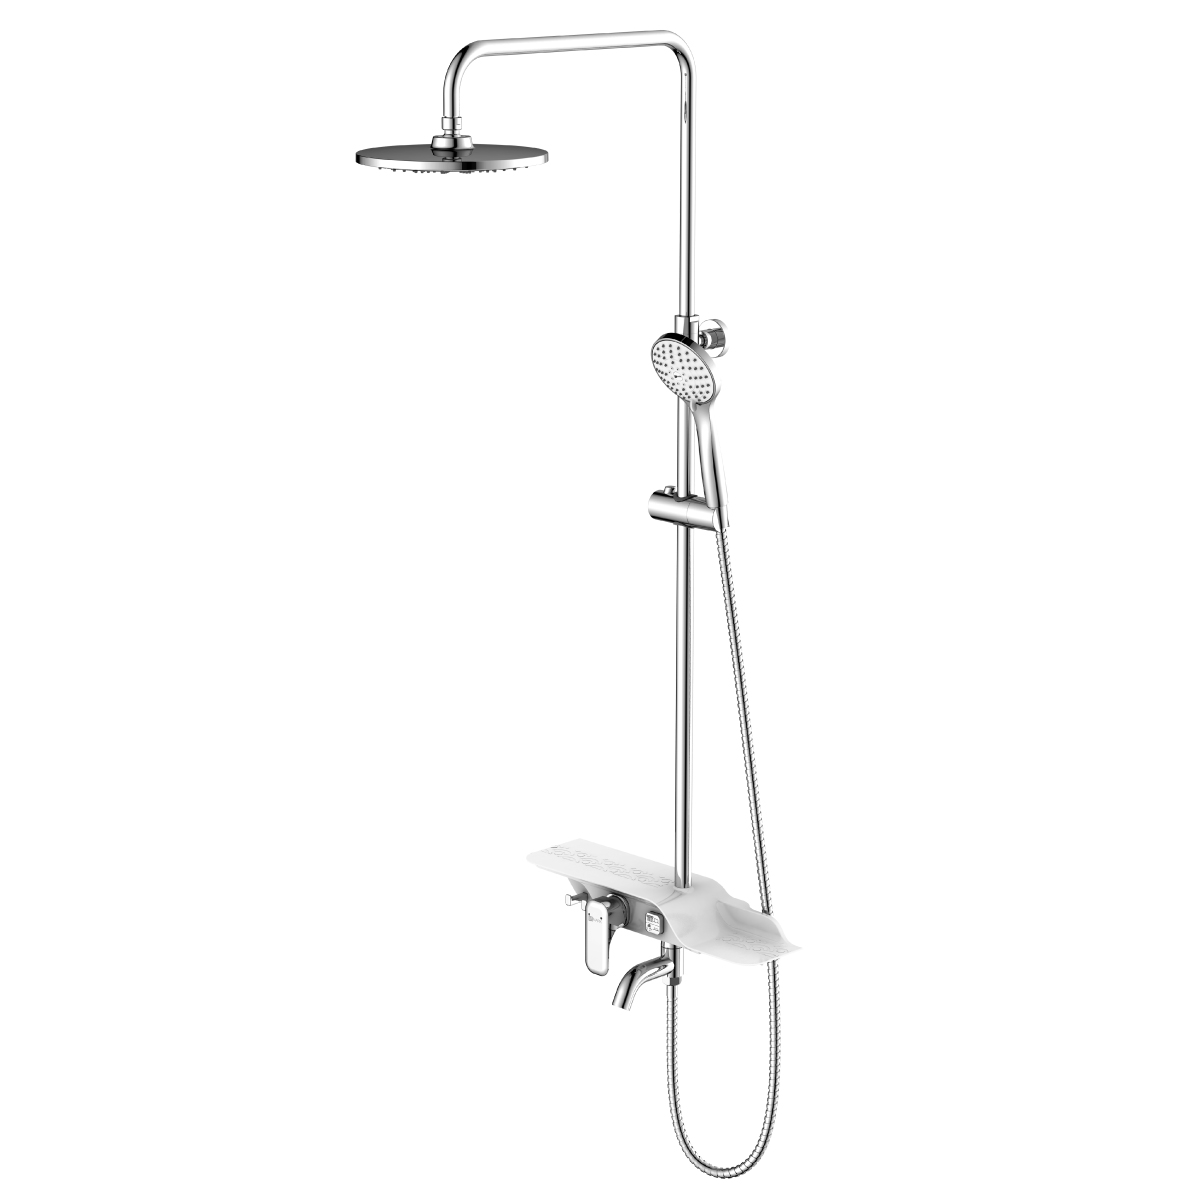 LM7003C Bath and shower faucet with adjustable rod height, swivel spout and «Tropical rain» shower head